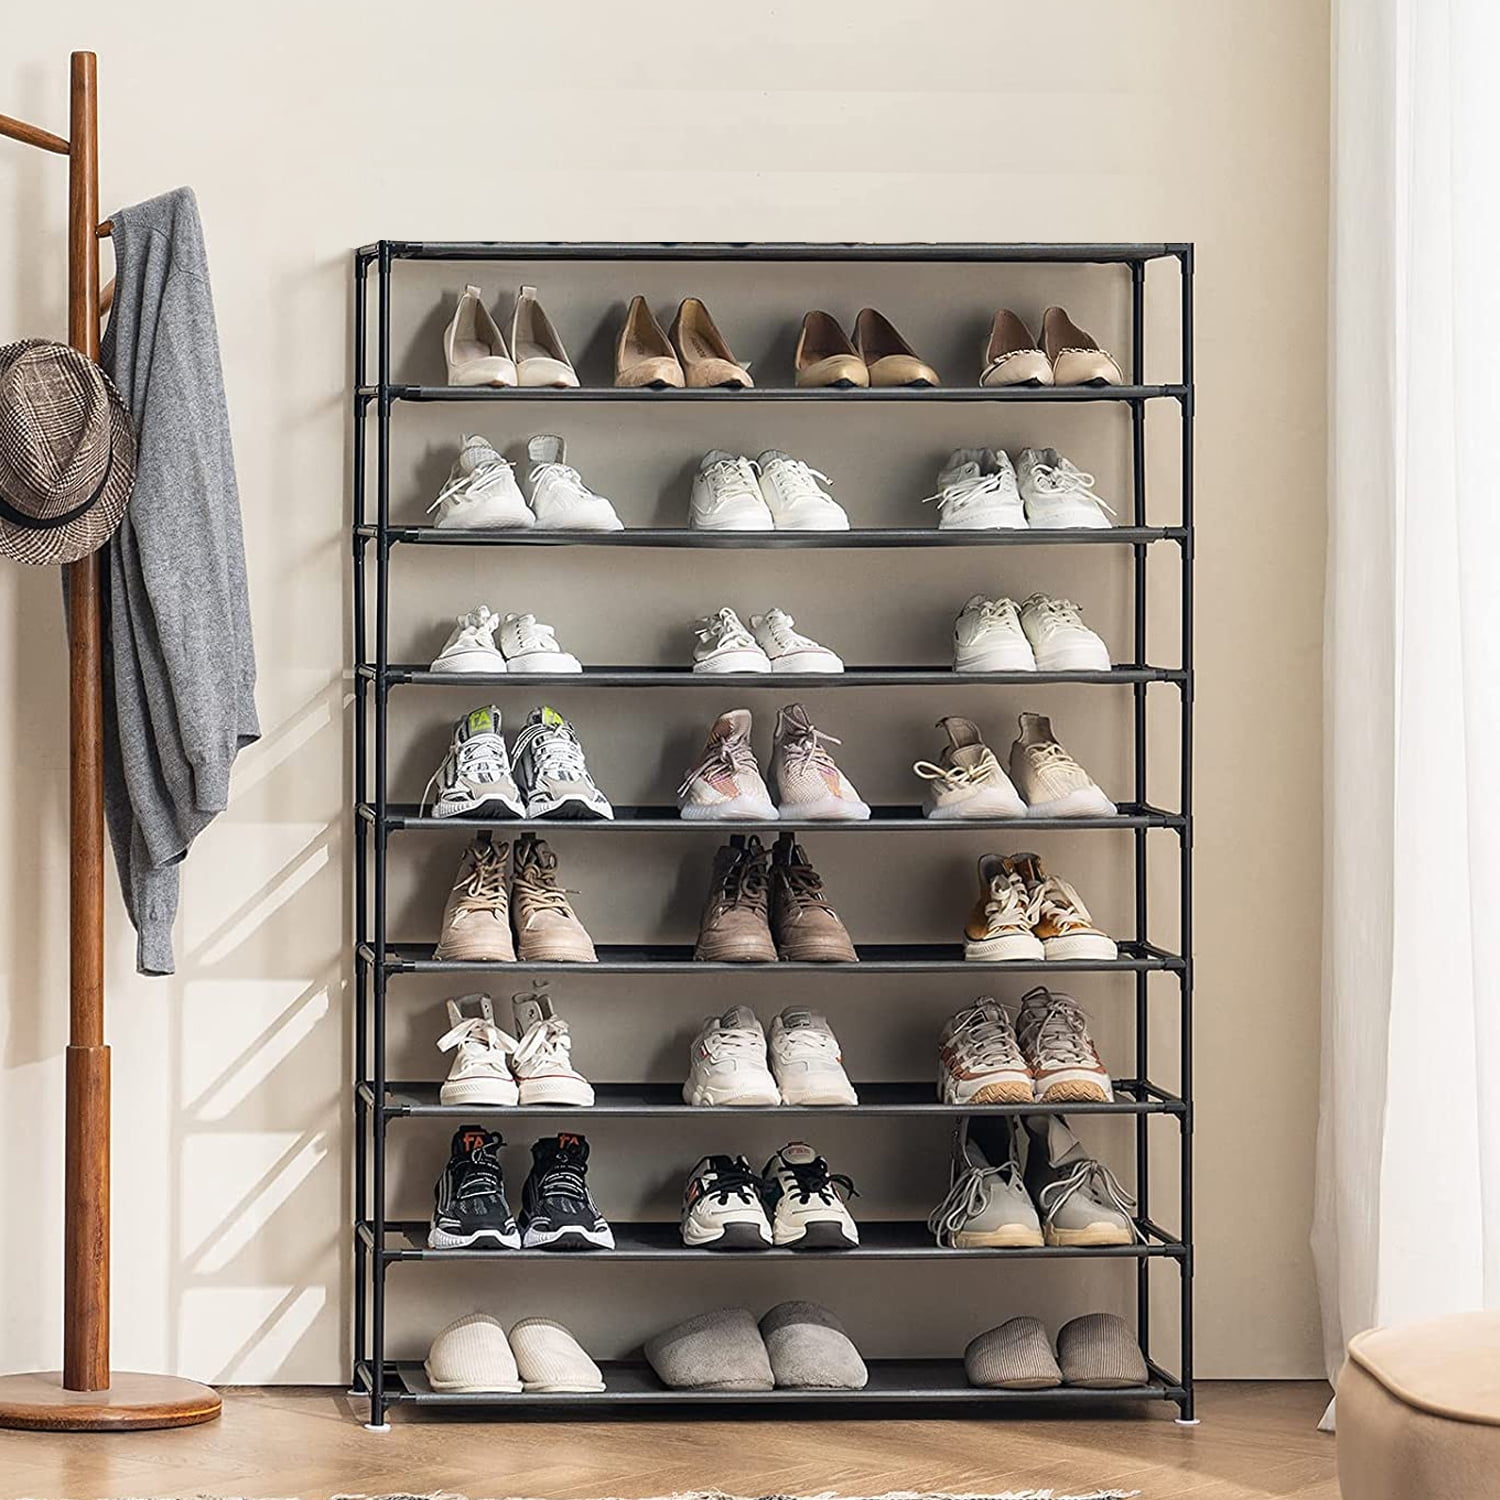  WOWLIVE 9 Tiers Large Shoe Rack Storage Organizer for